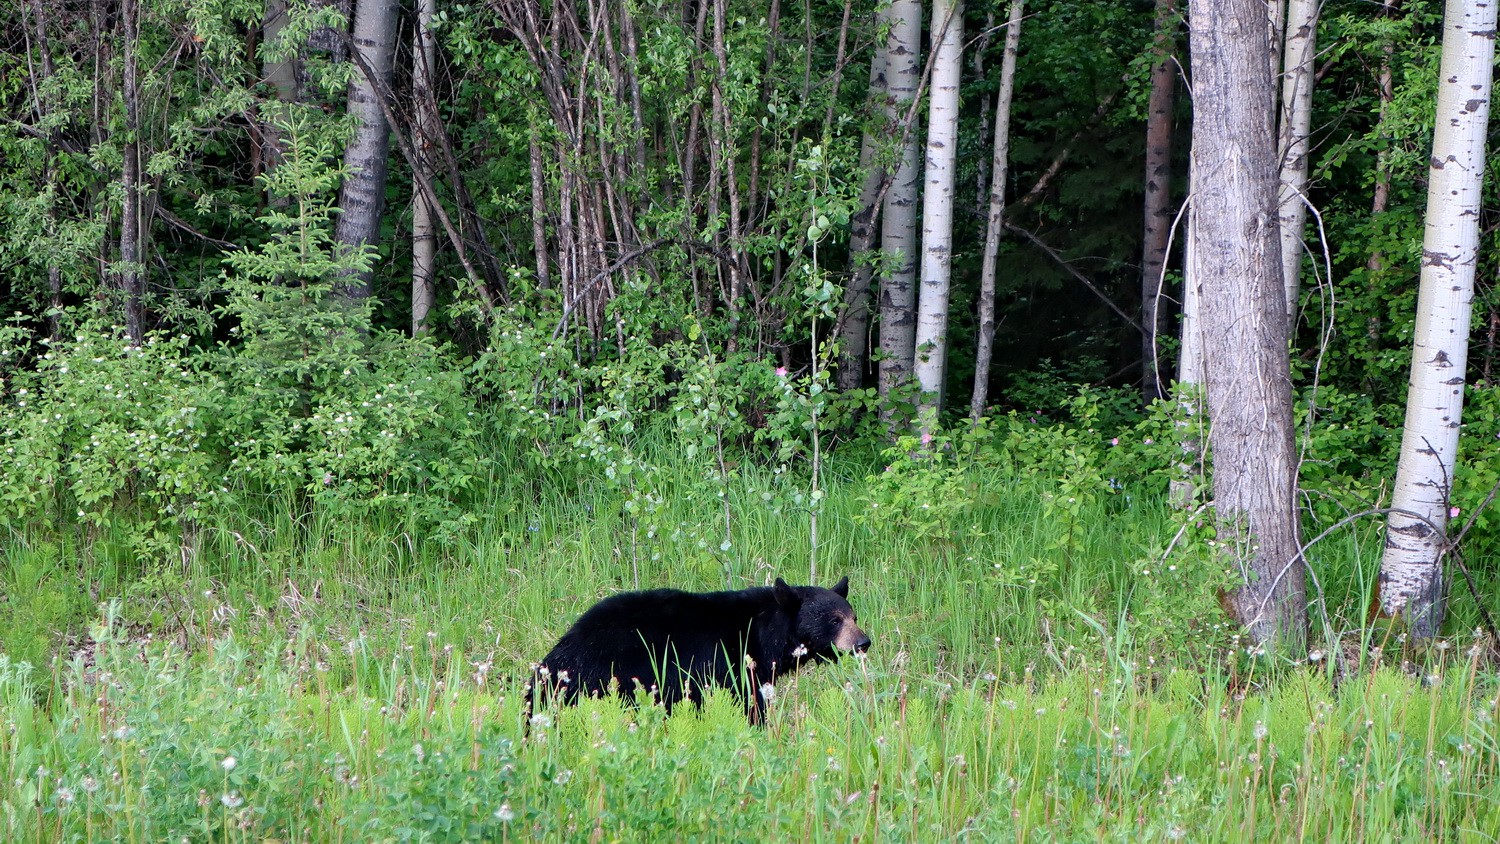 Another Black Bear